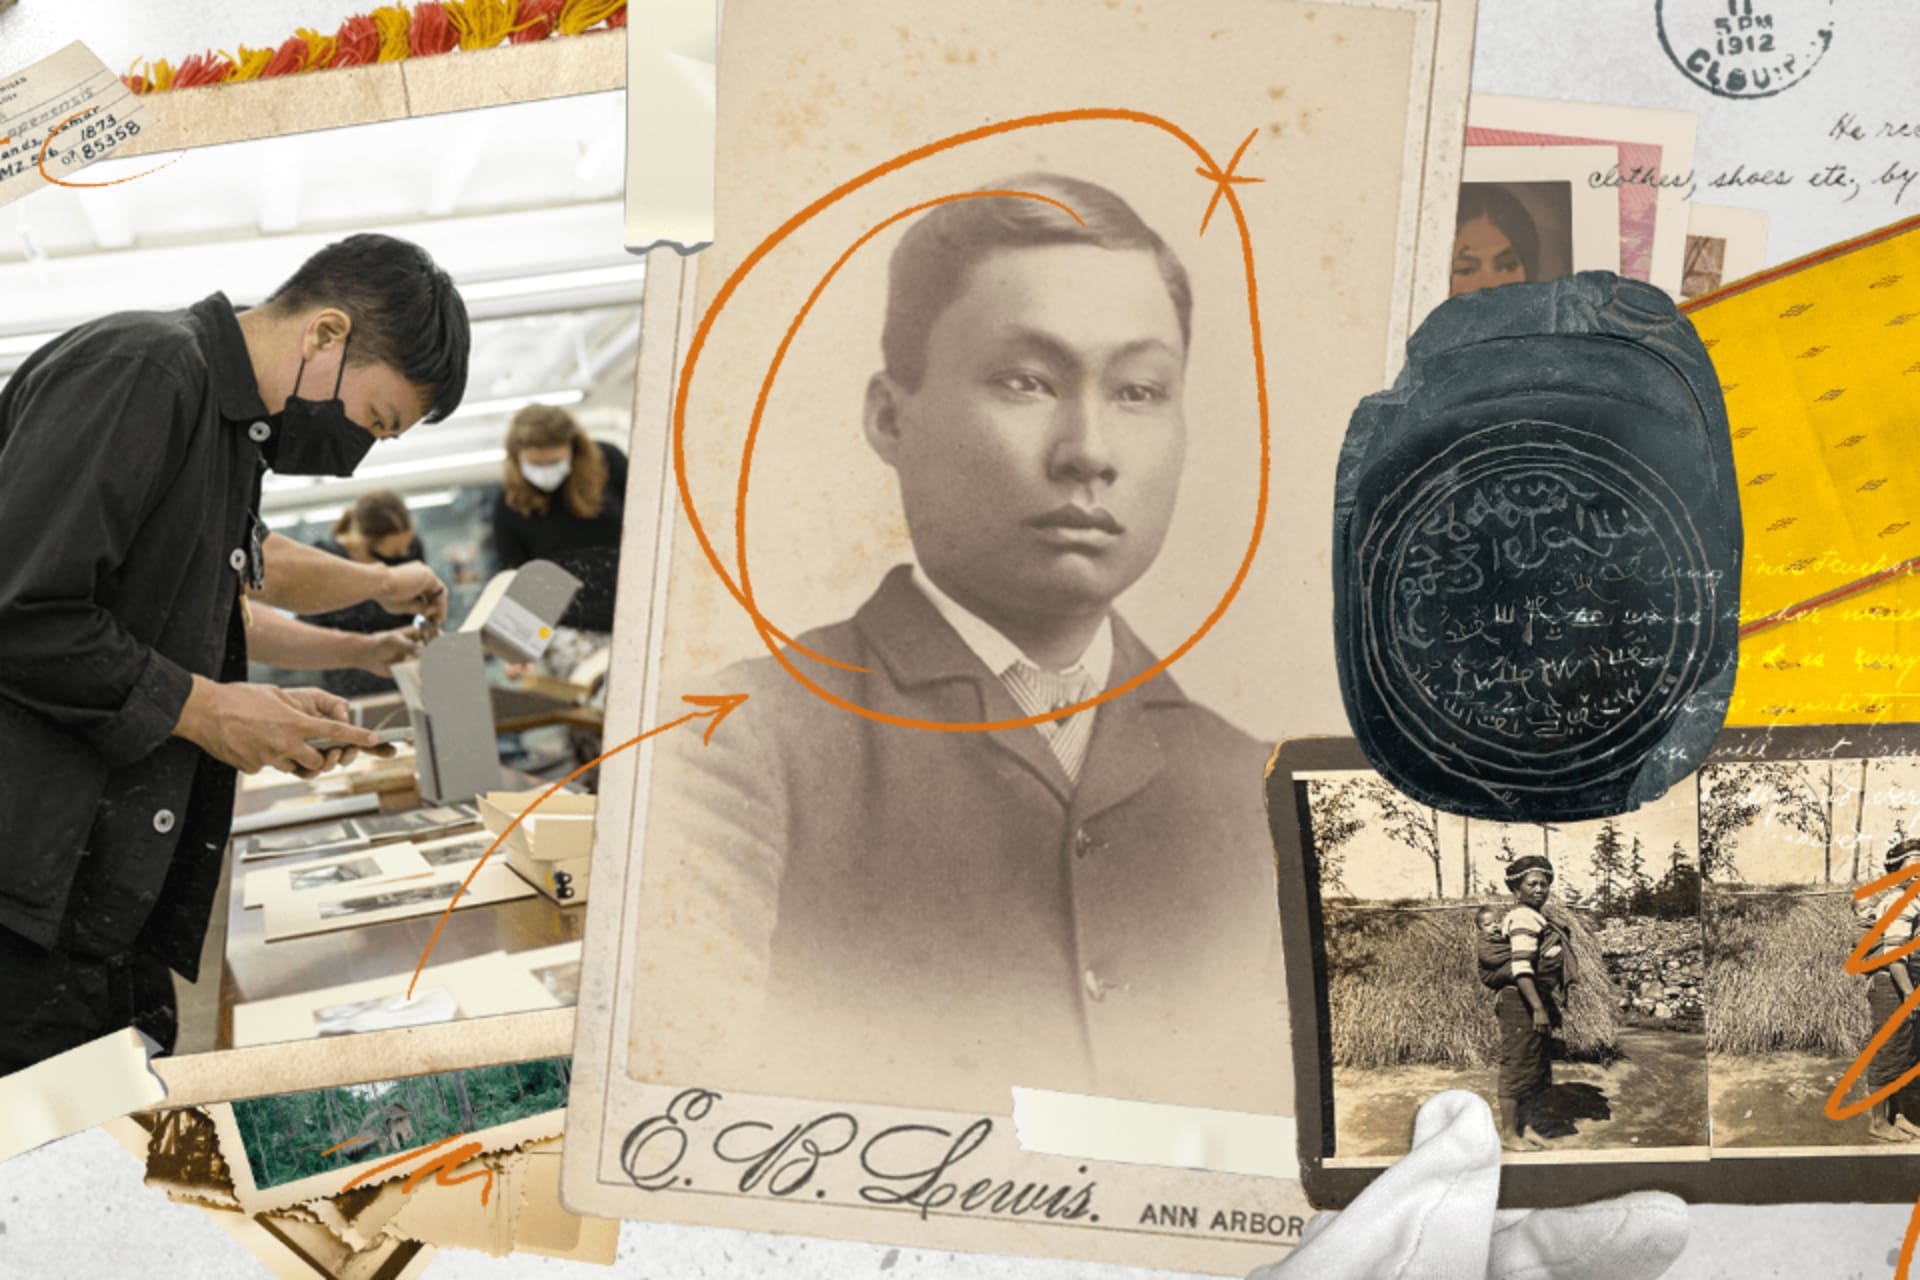 A collage featuring a person looking at archival materials and an old photograph.